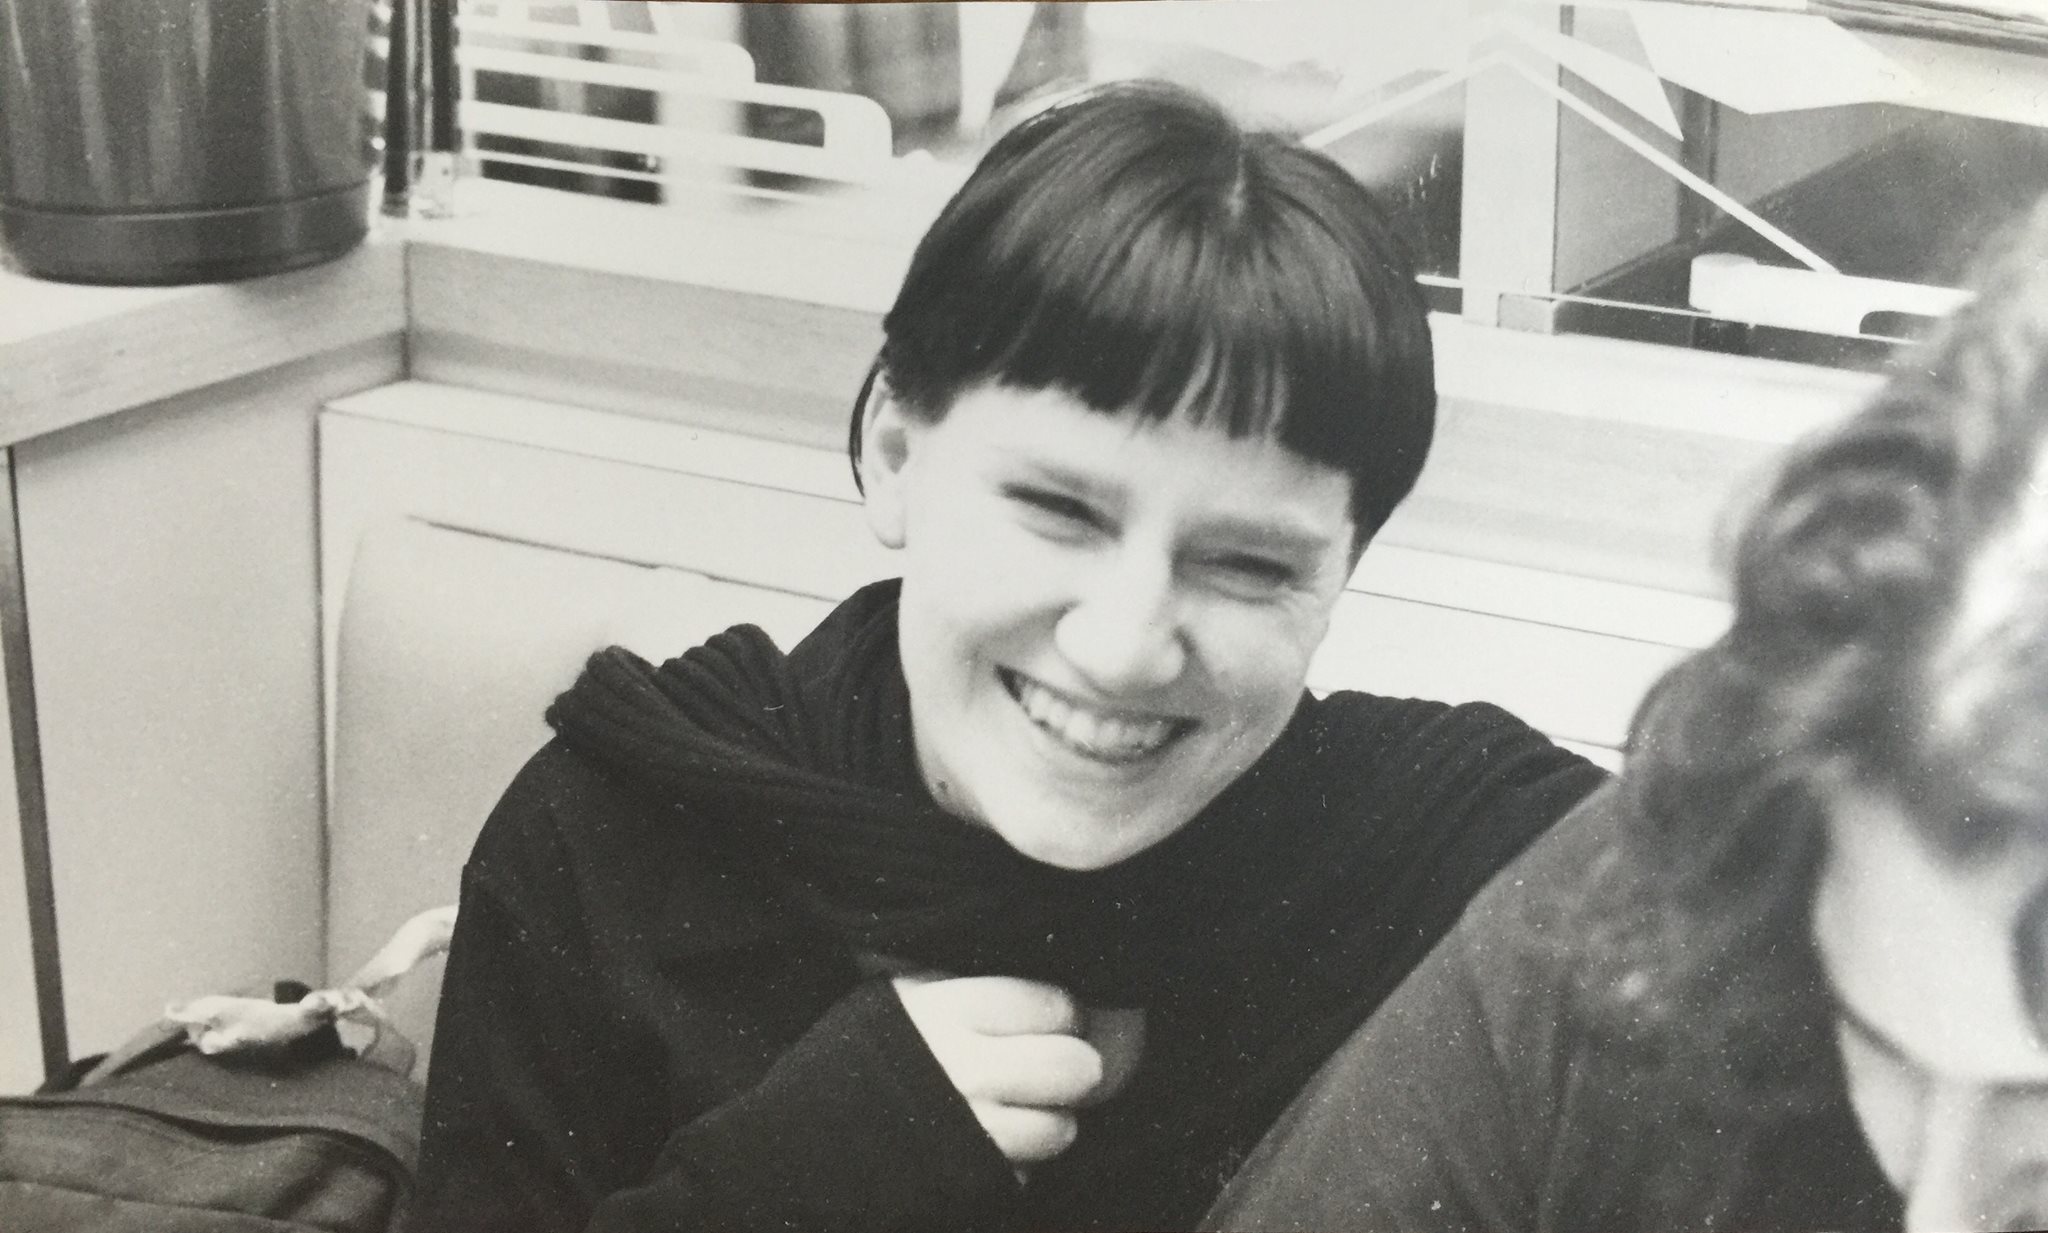 McNeil at a diner near campus during her Barnard years.